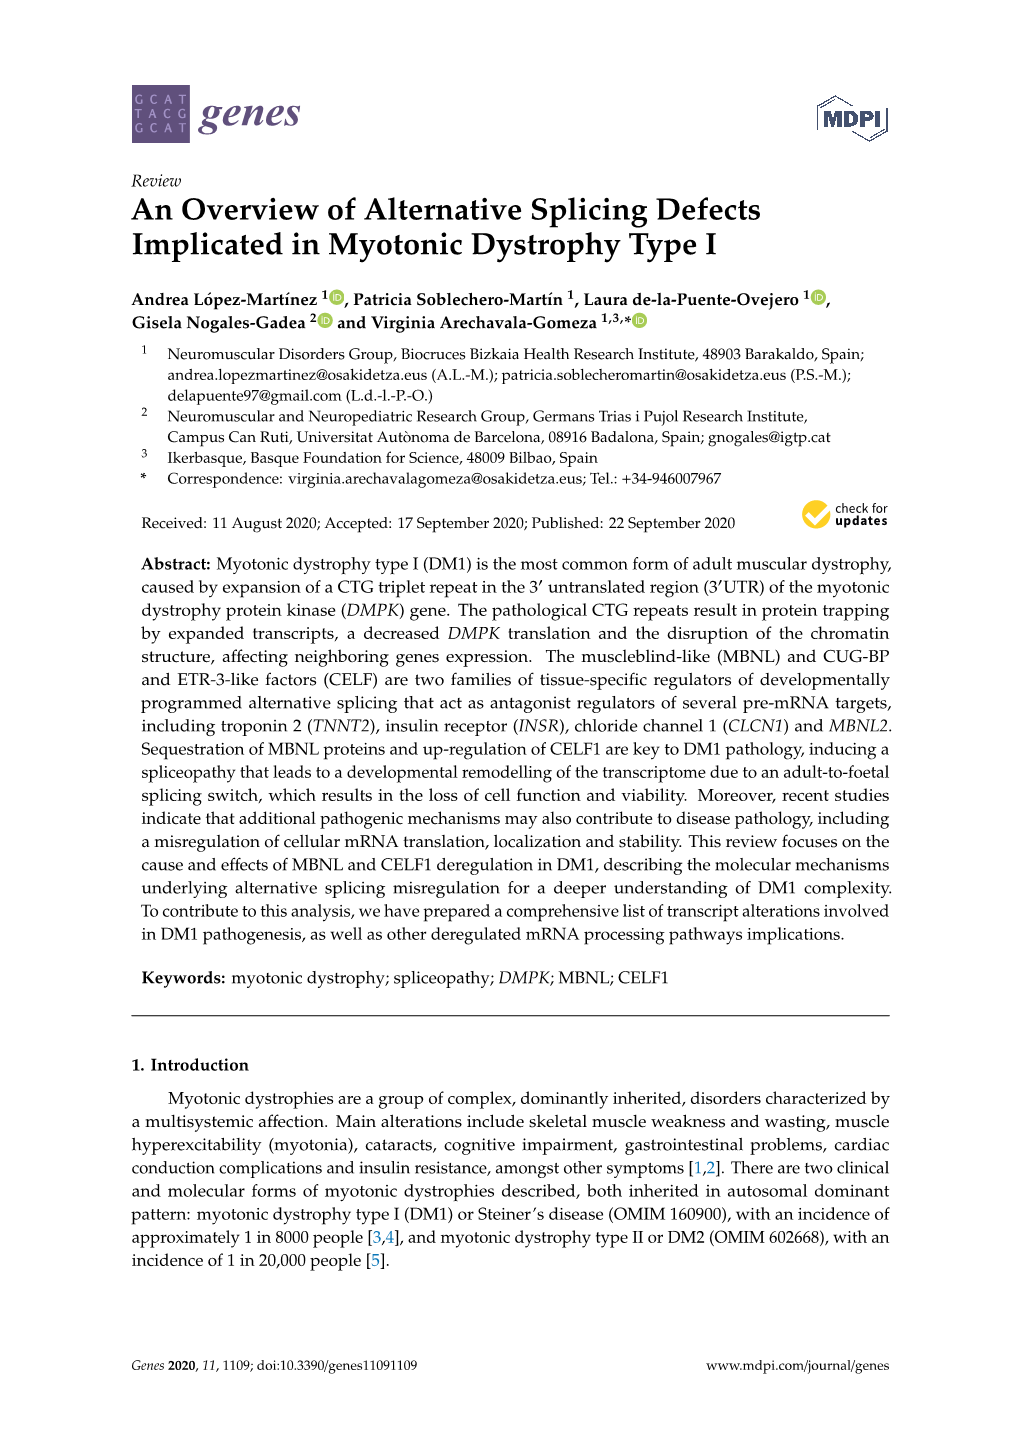 An Overview of Alternative Splicing Defects Implicated in Myotonic Dystrophy Type I